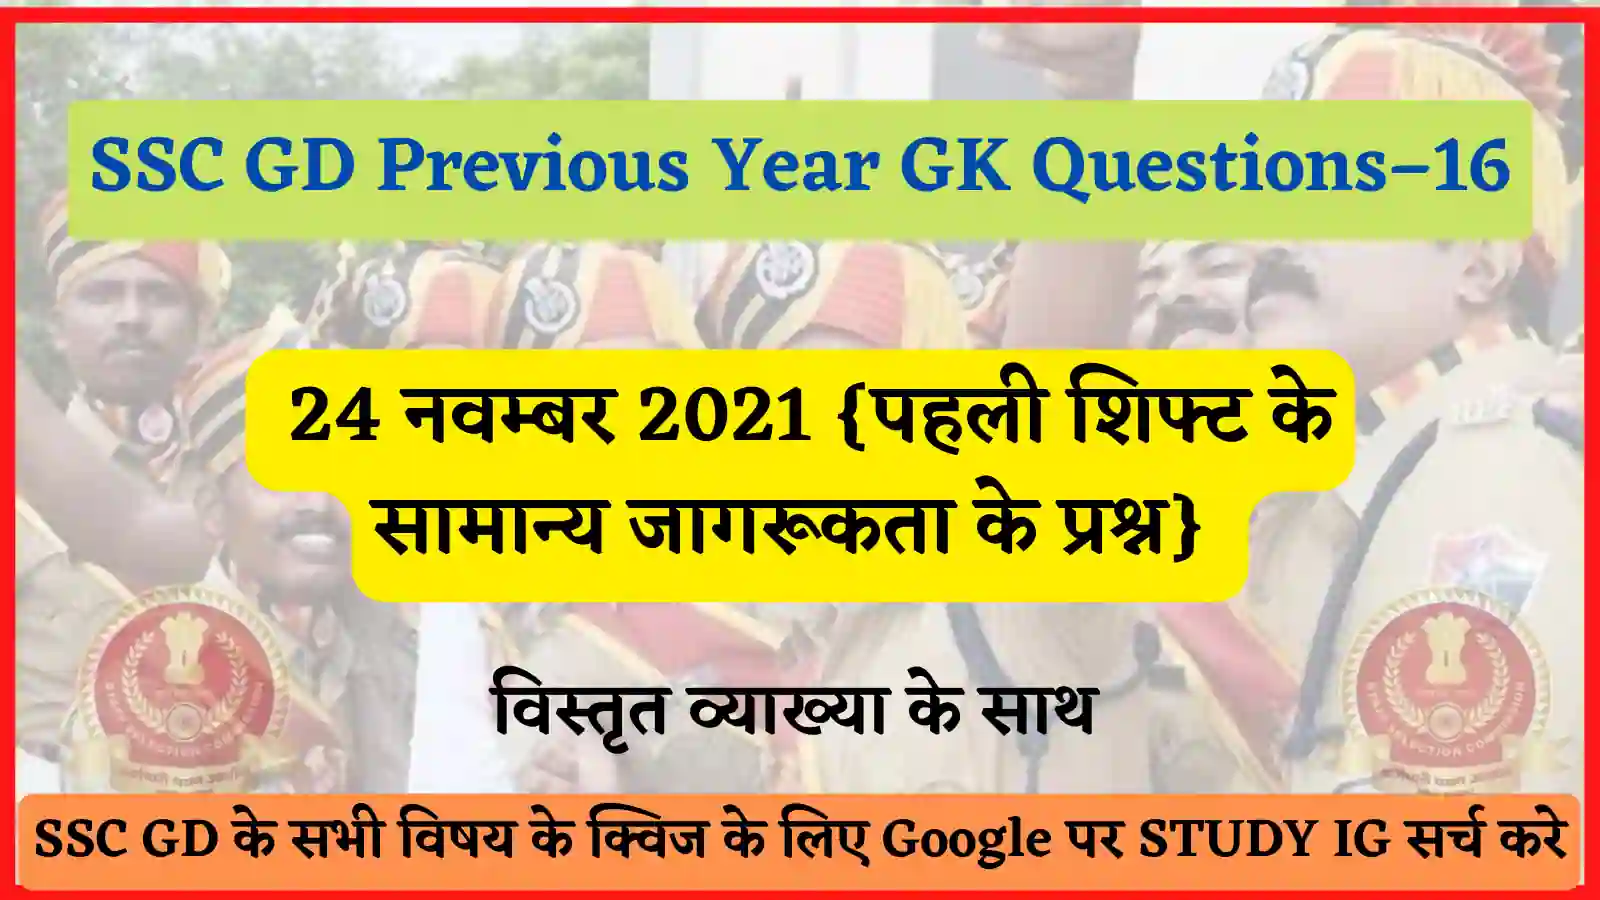 SSC GD Previous Year GK Questions / Quiz - 16